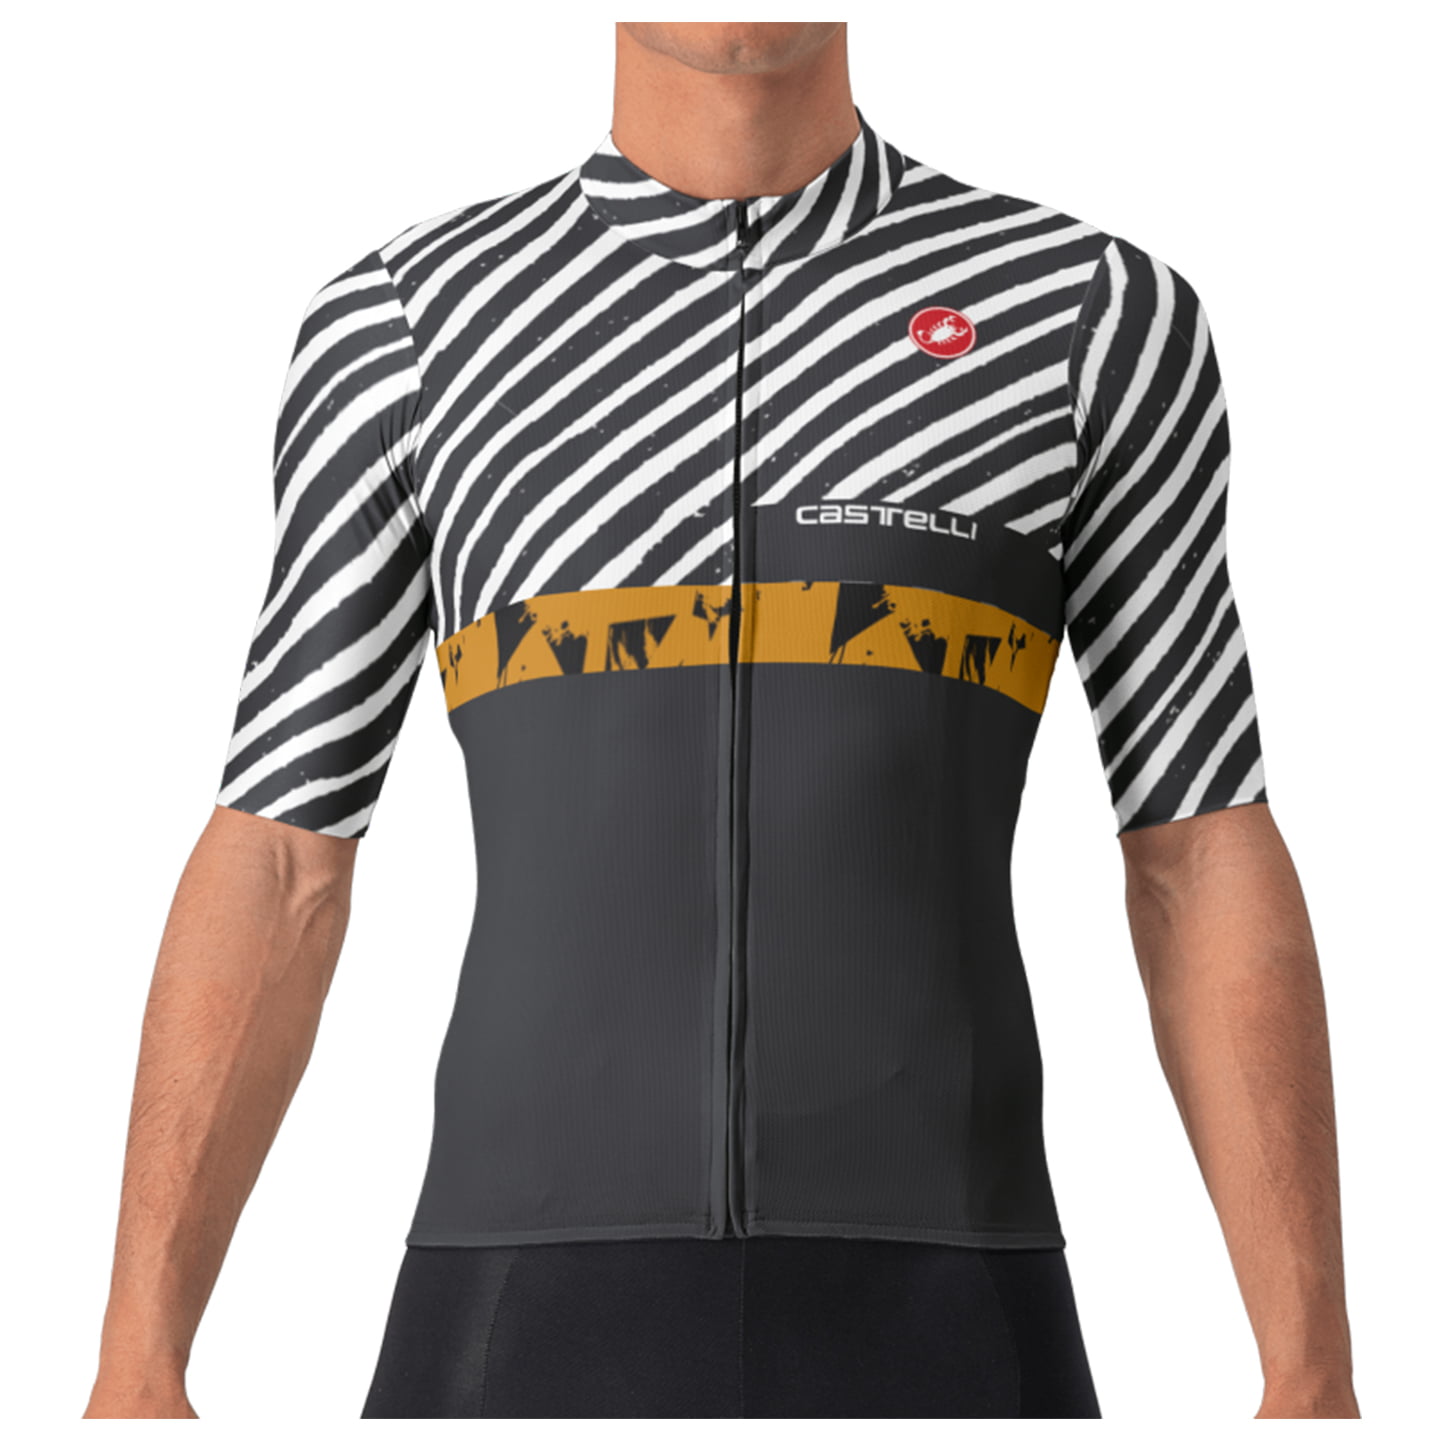 CASTELLI Diagon Short Sleeve Jersey, for men, size M, Cycling jersey, Cycling clothing